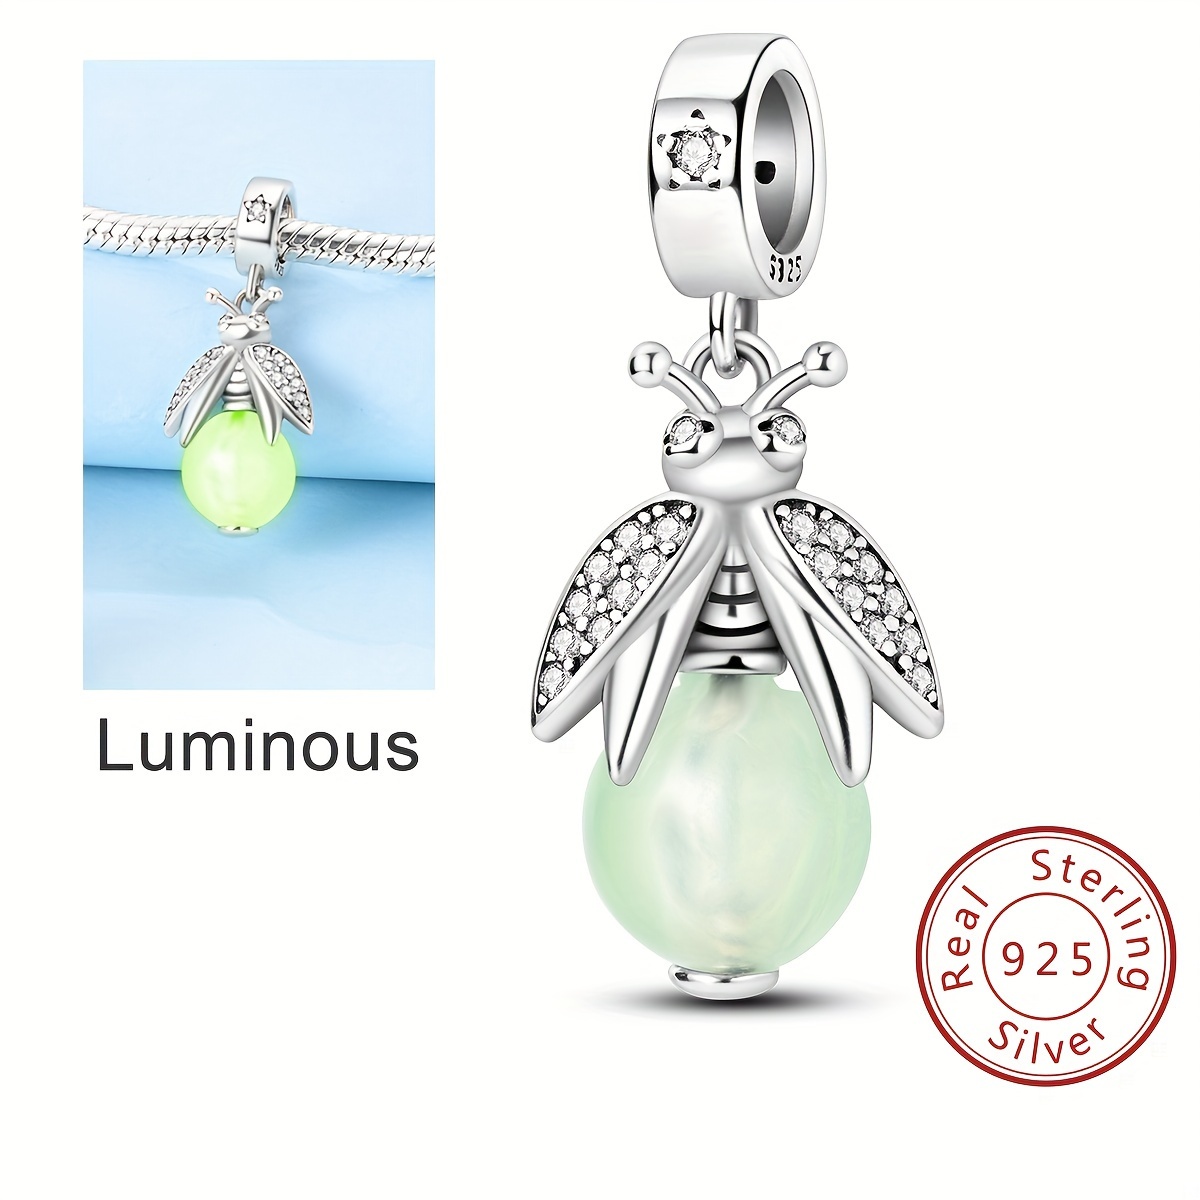 

Luminous Firefly 925 Sterling Silver Charm Beads Fit Original Charms Bracelet Necklace Silver Jewelry Making Diy Gift